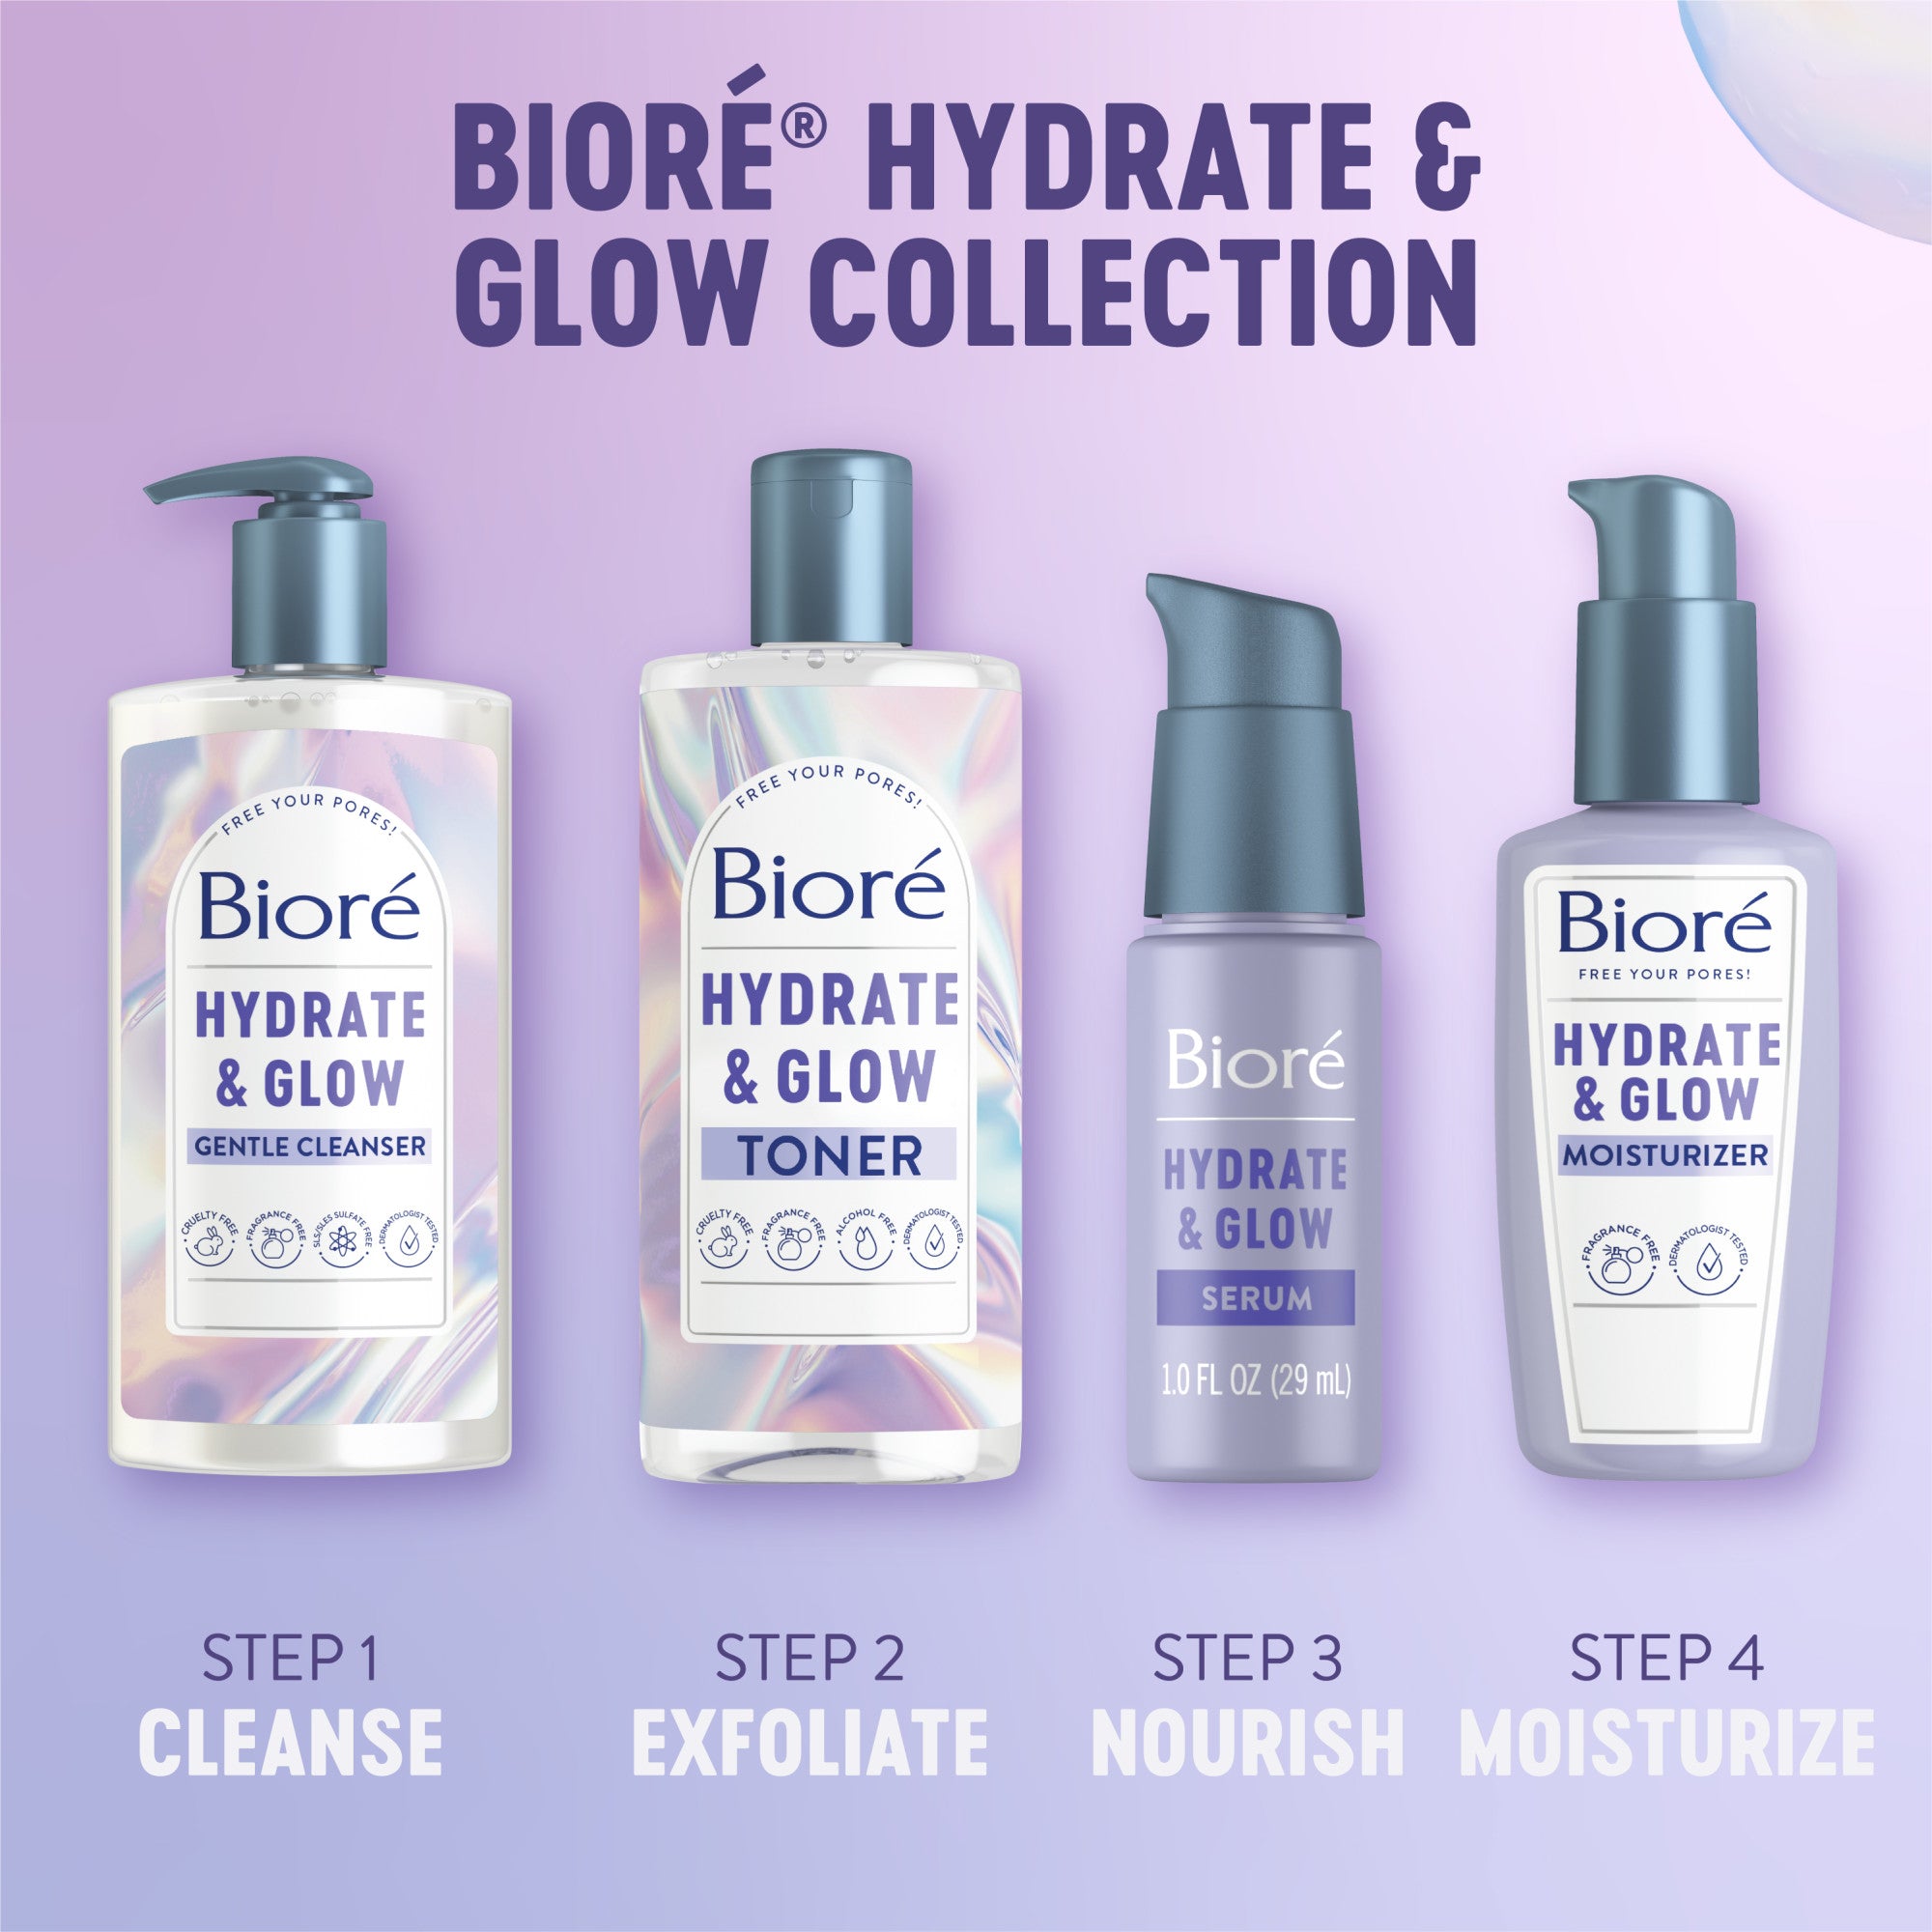 Biore Hydrate and glow collection. Step 1. Cleanse. Step 2. Exfoliate. Step 3. Nourish. Step 4. Moisturize.